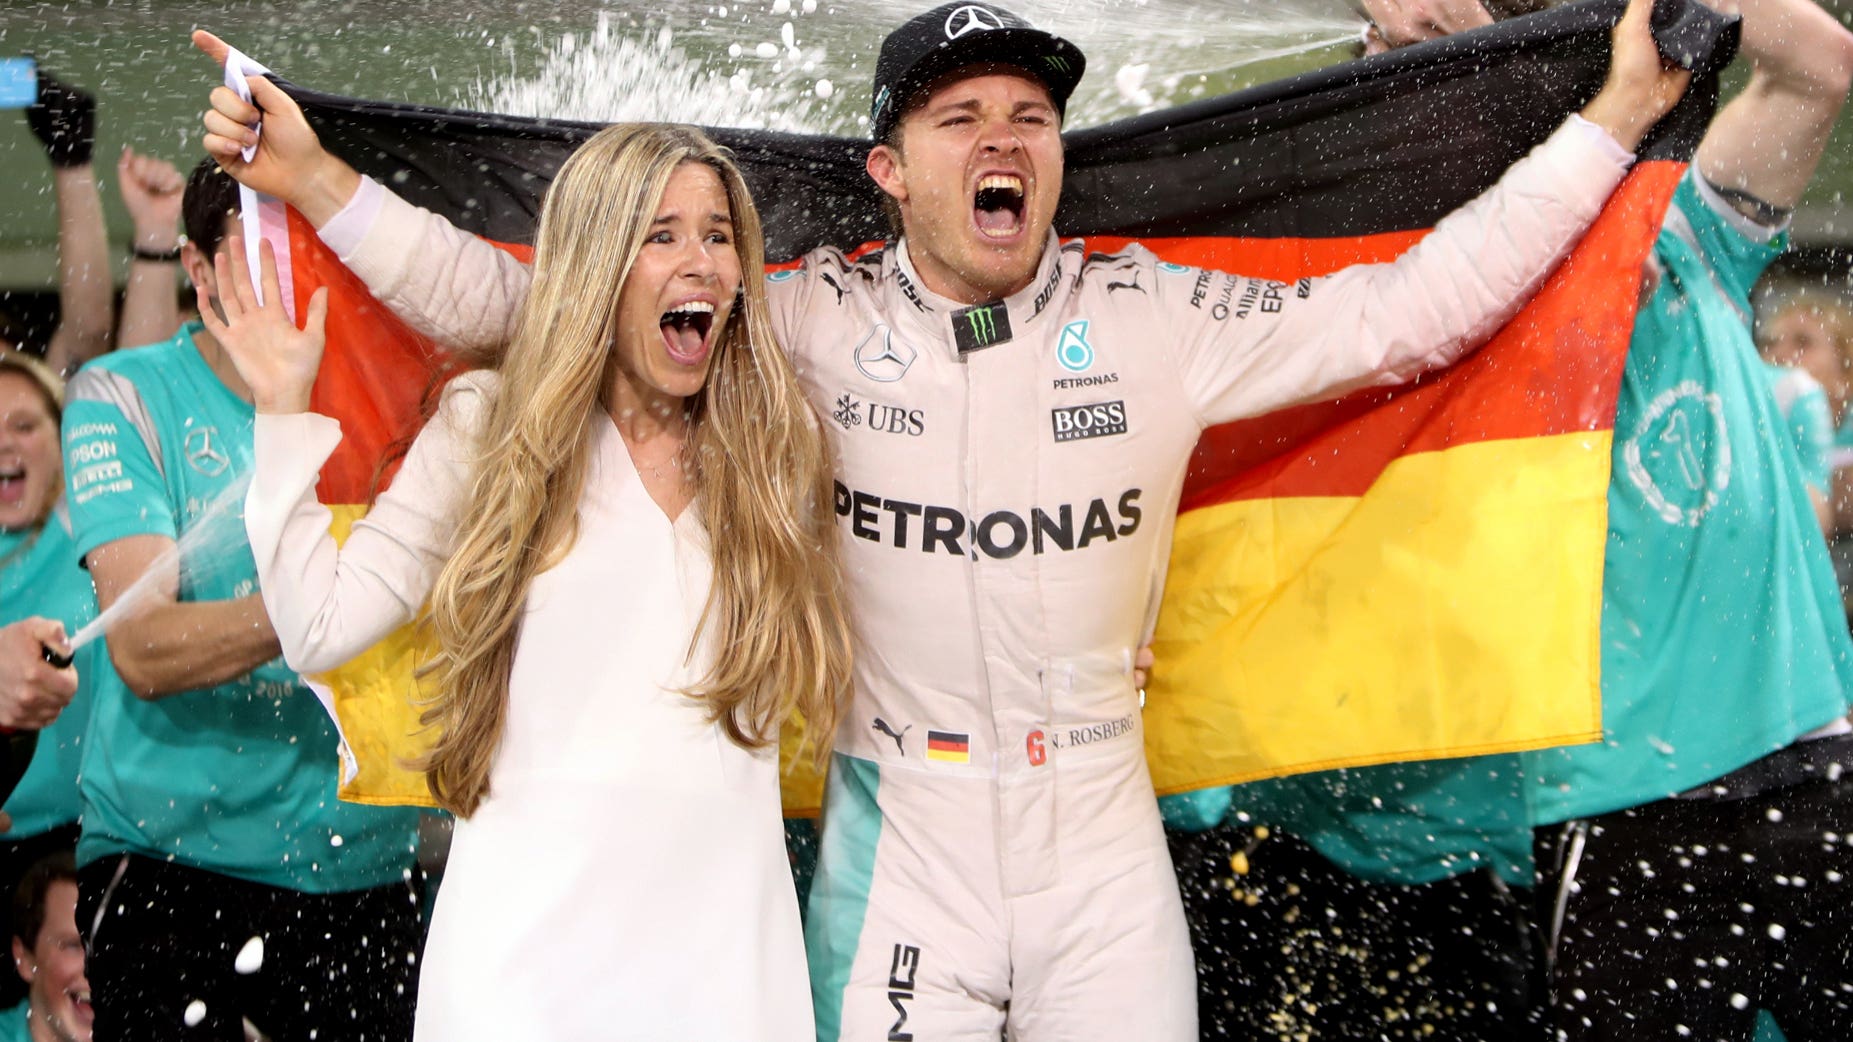 On This Day in 2016: Nico becomes One world champion | BT Sport